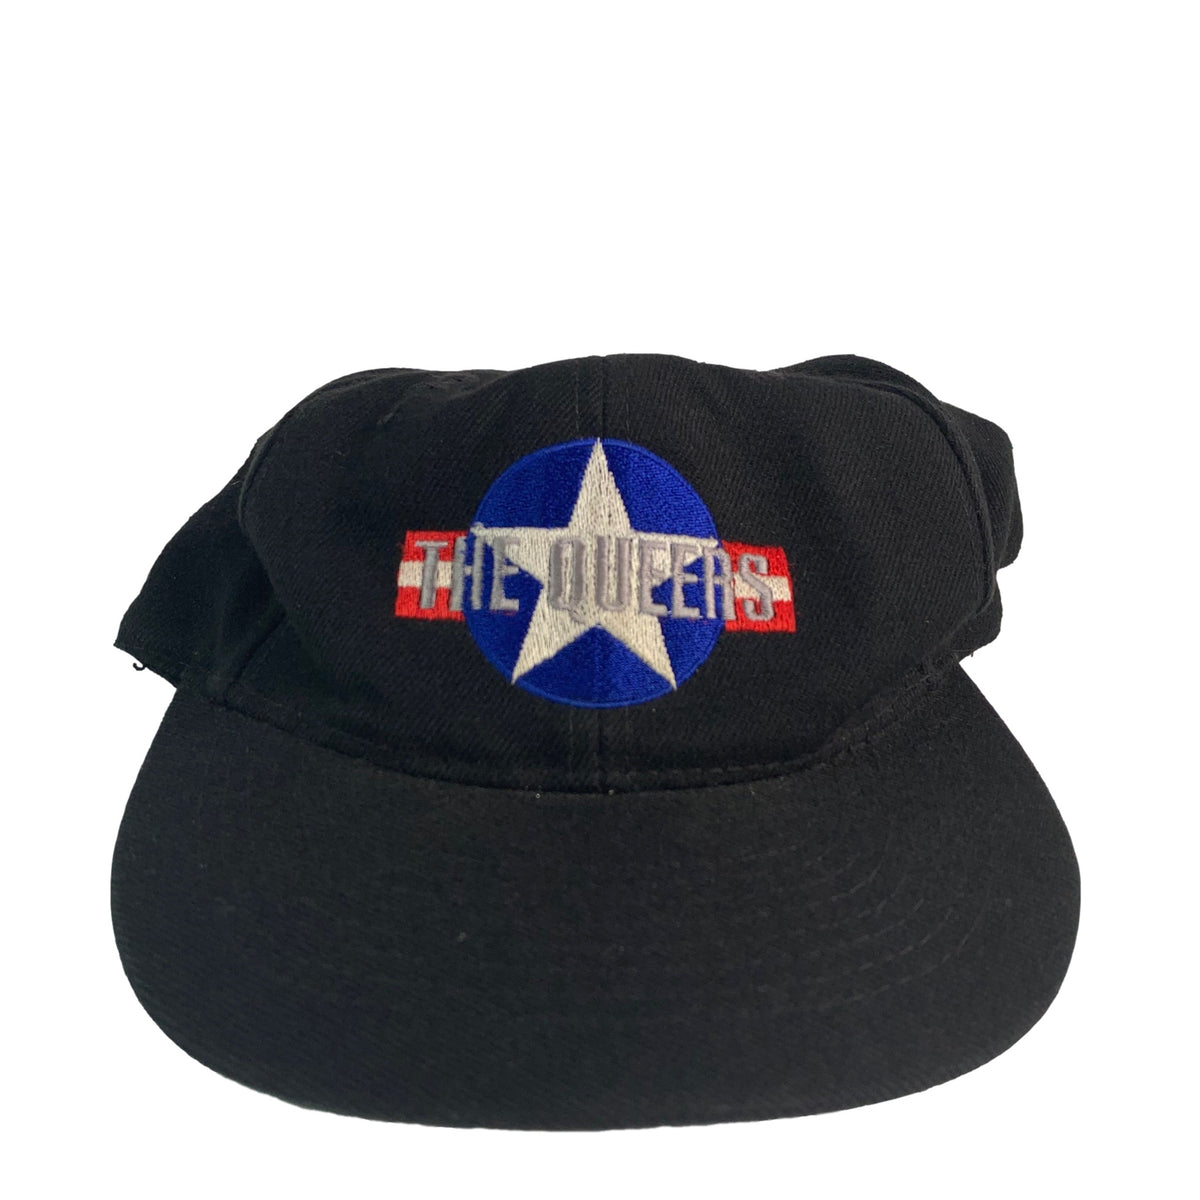 Vintage The Queers &quot;Star&quot; Baseball Hat - jointcustodydc